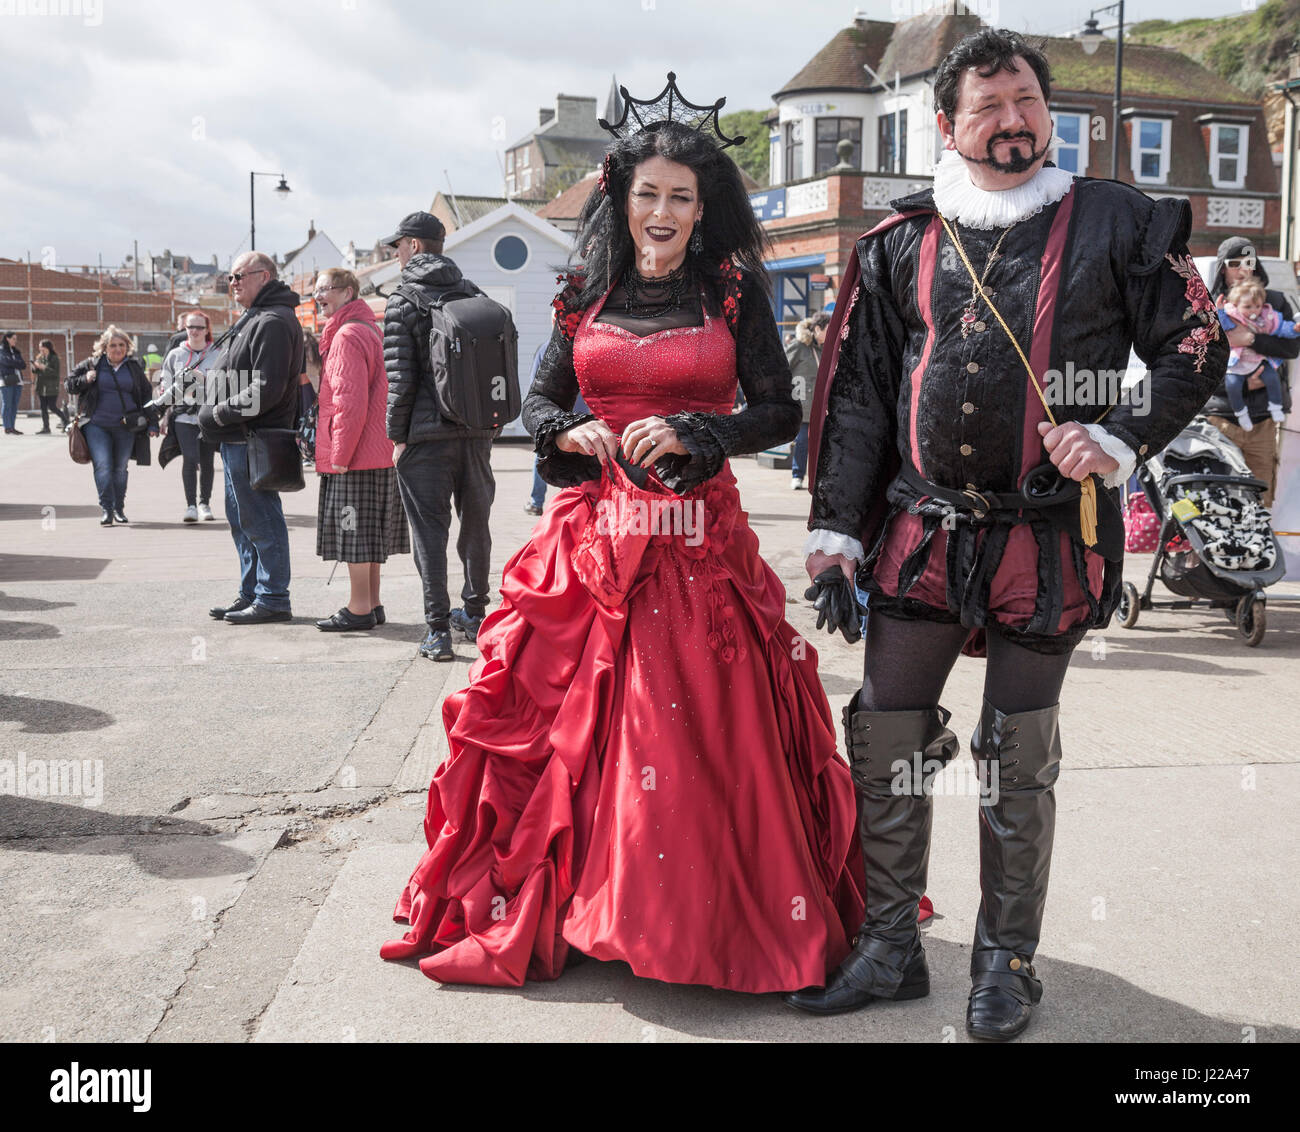 A man and woman pose for photos at the Whitby Goth celebrations in North Yorkshire,England,UK Stock Photo